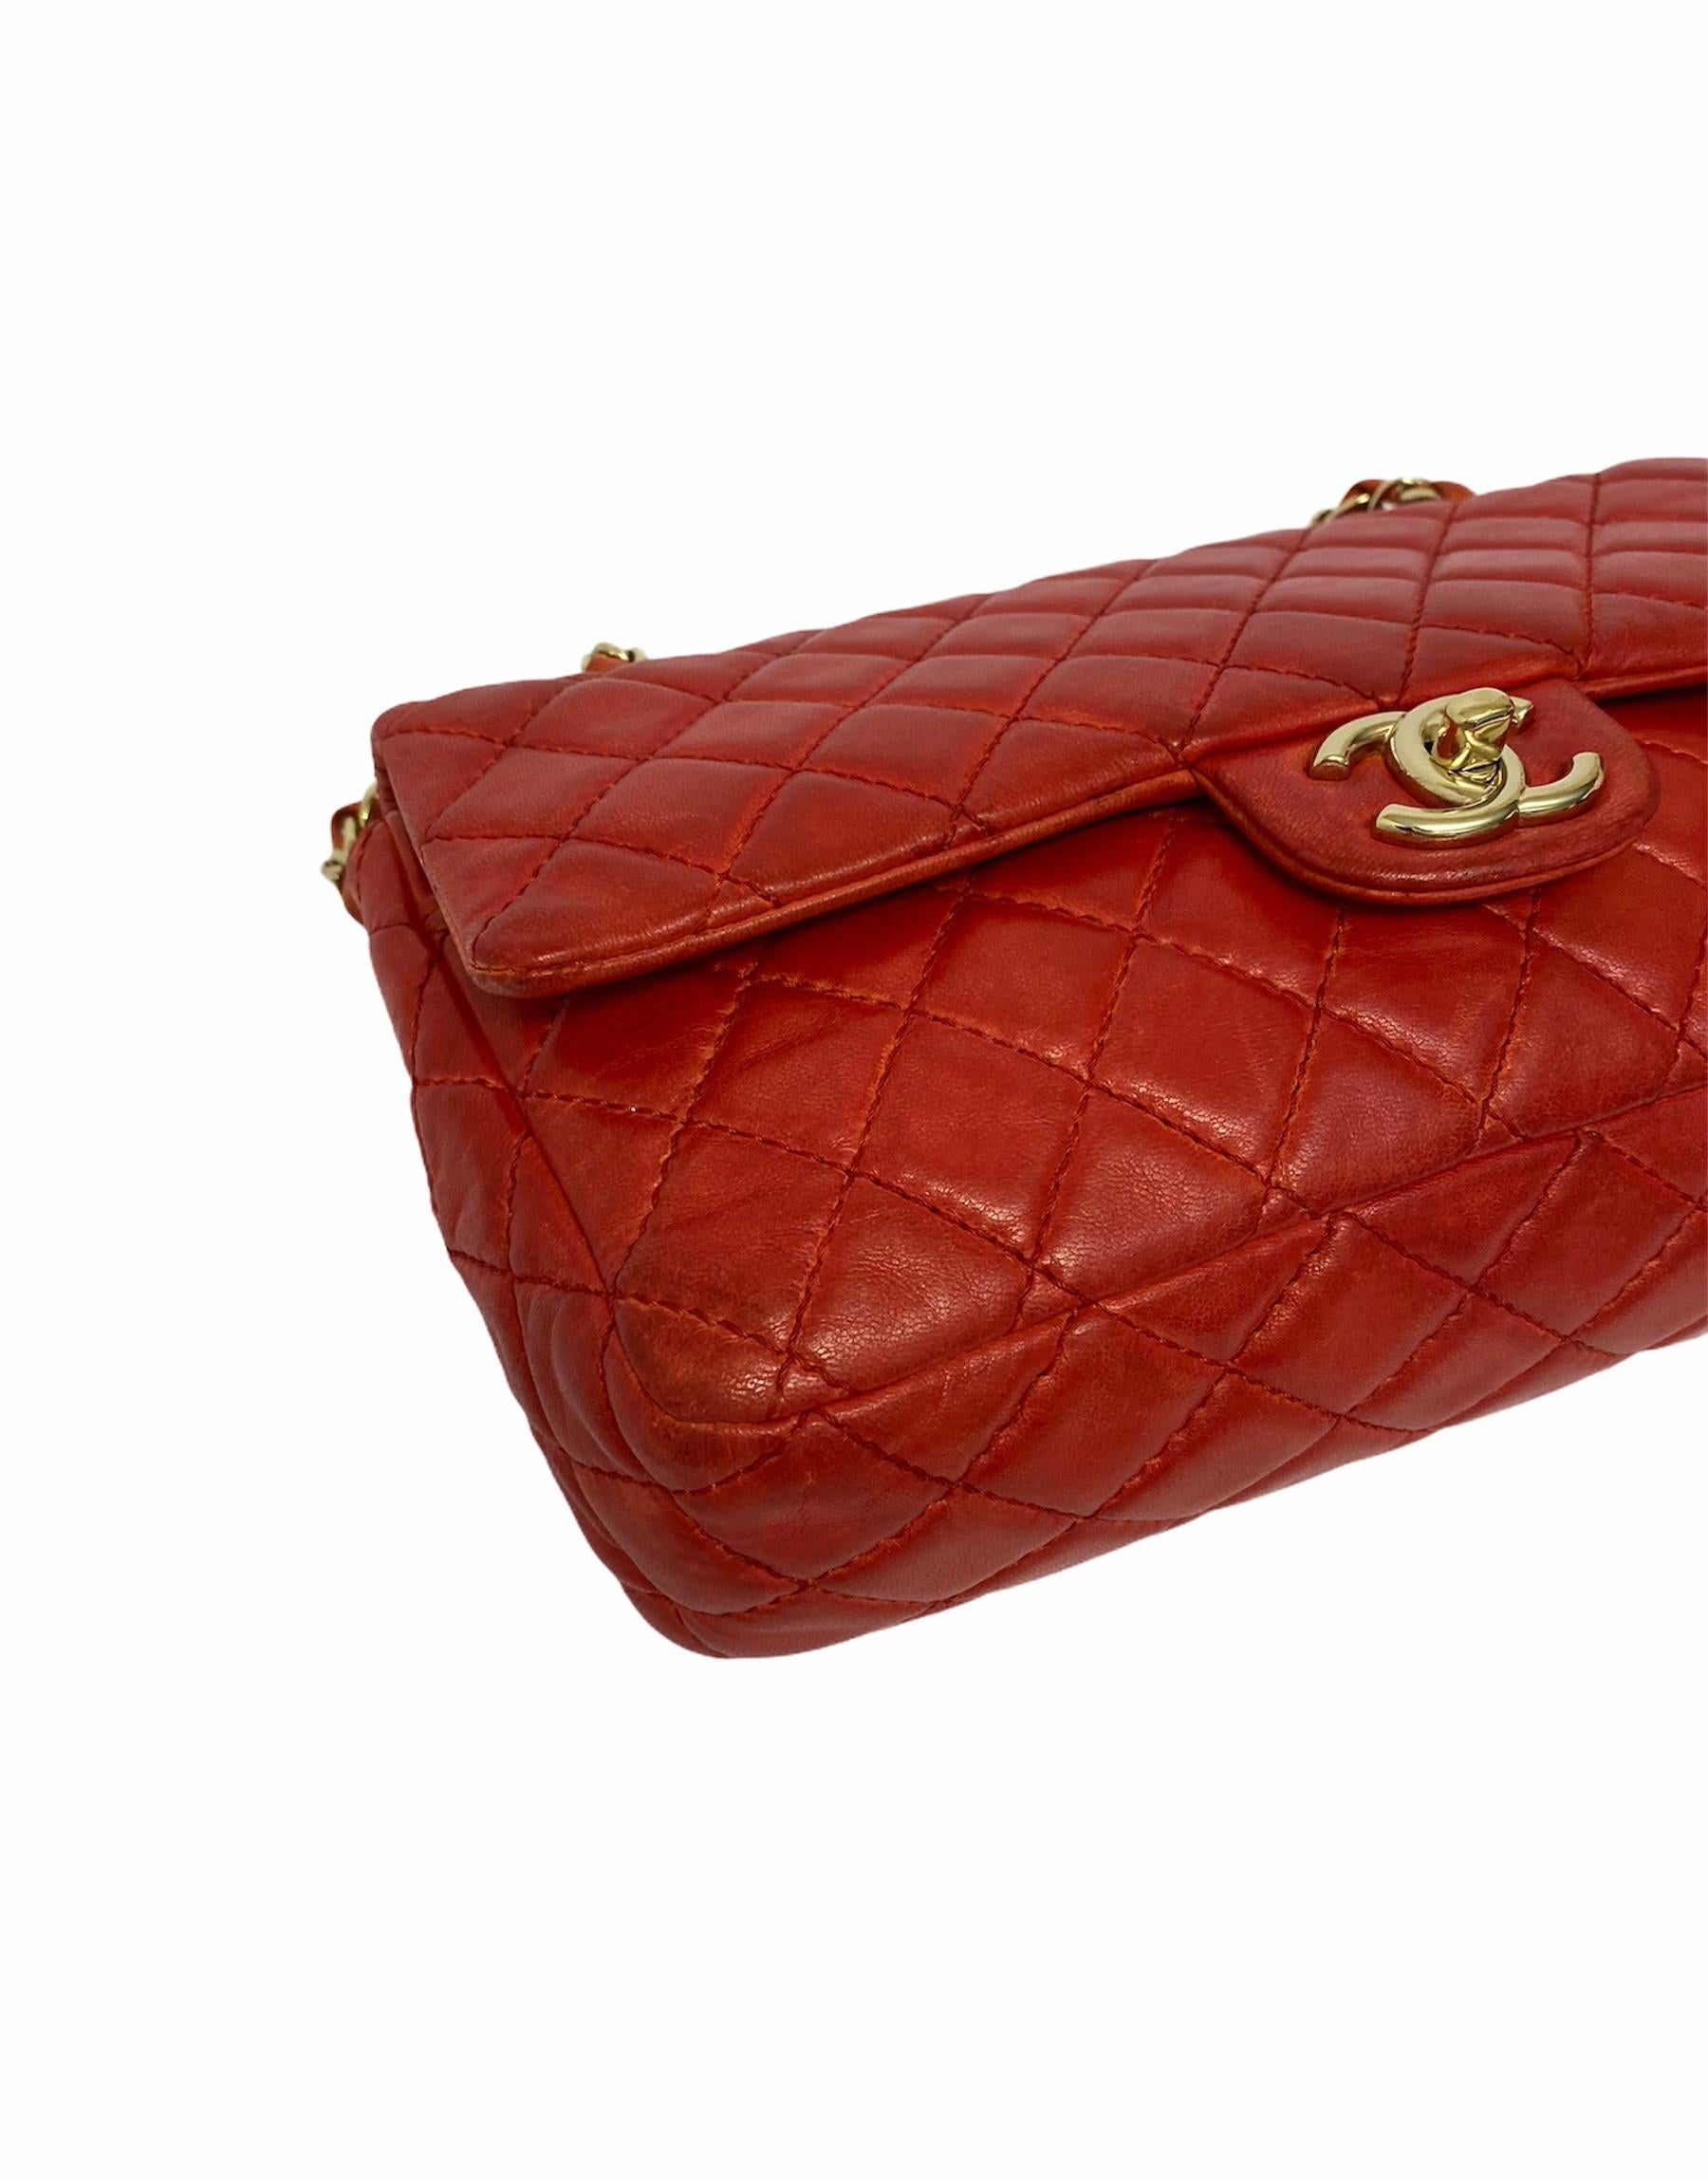 Chanel 2.55 Red Leather with Golden Hardware 3